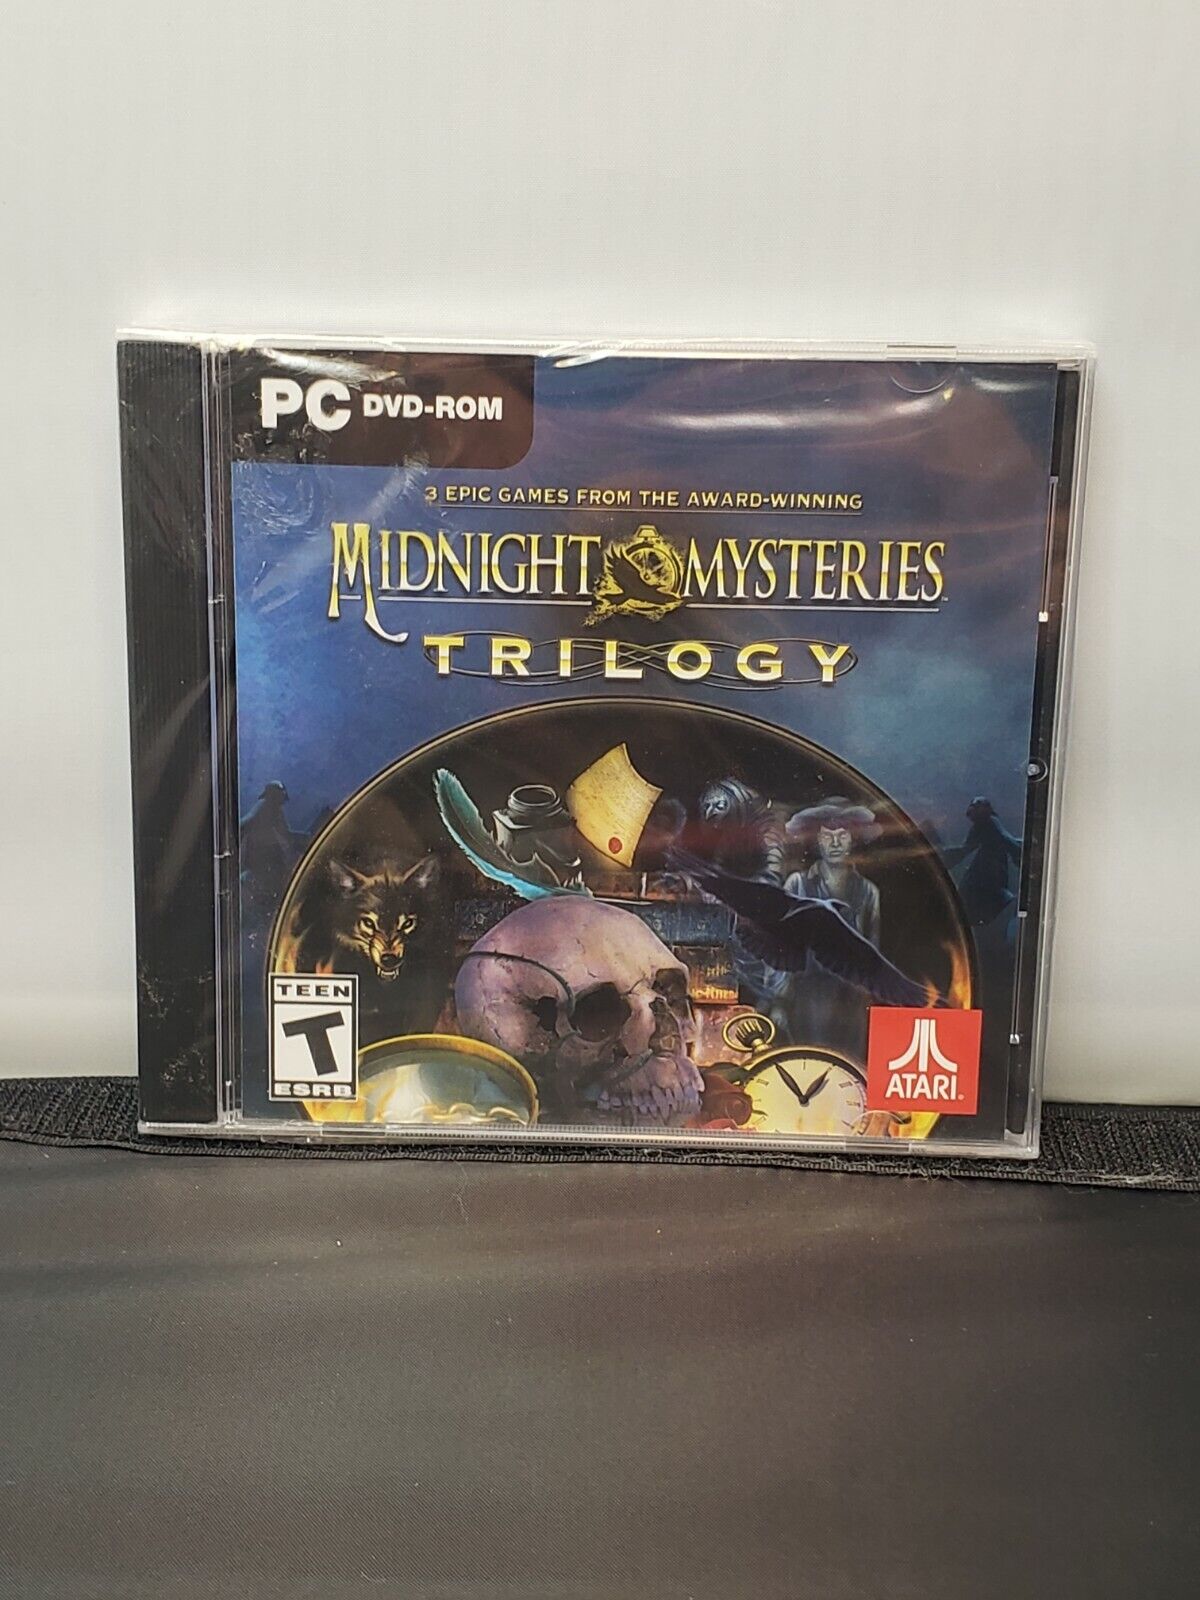 Midnight Mysteries Trilogy By Atari PC DVD-ROM 3 Hidden Object Computer Game